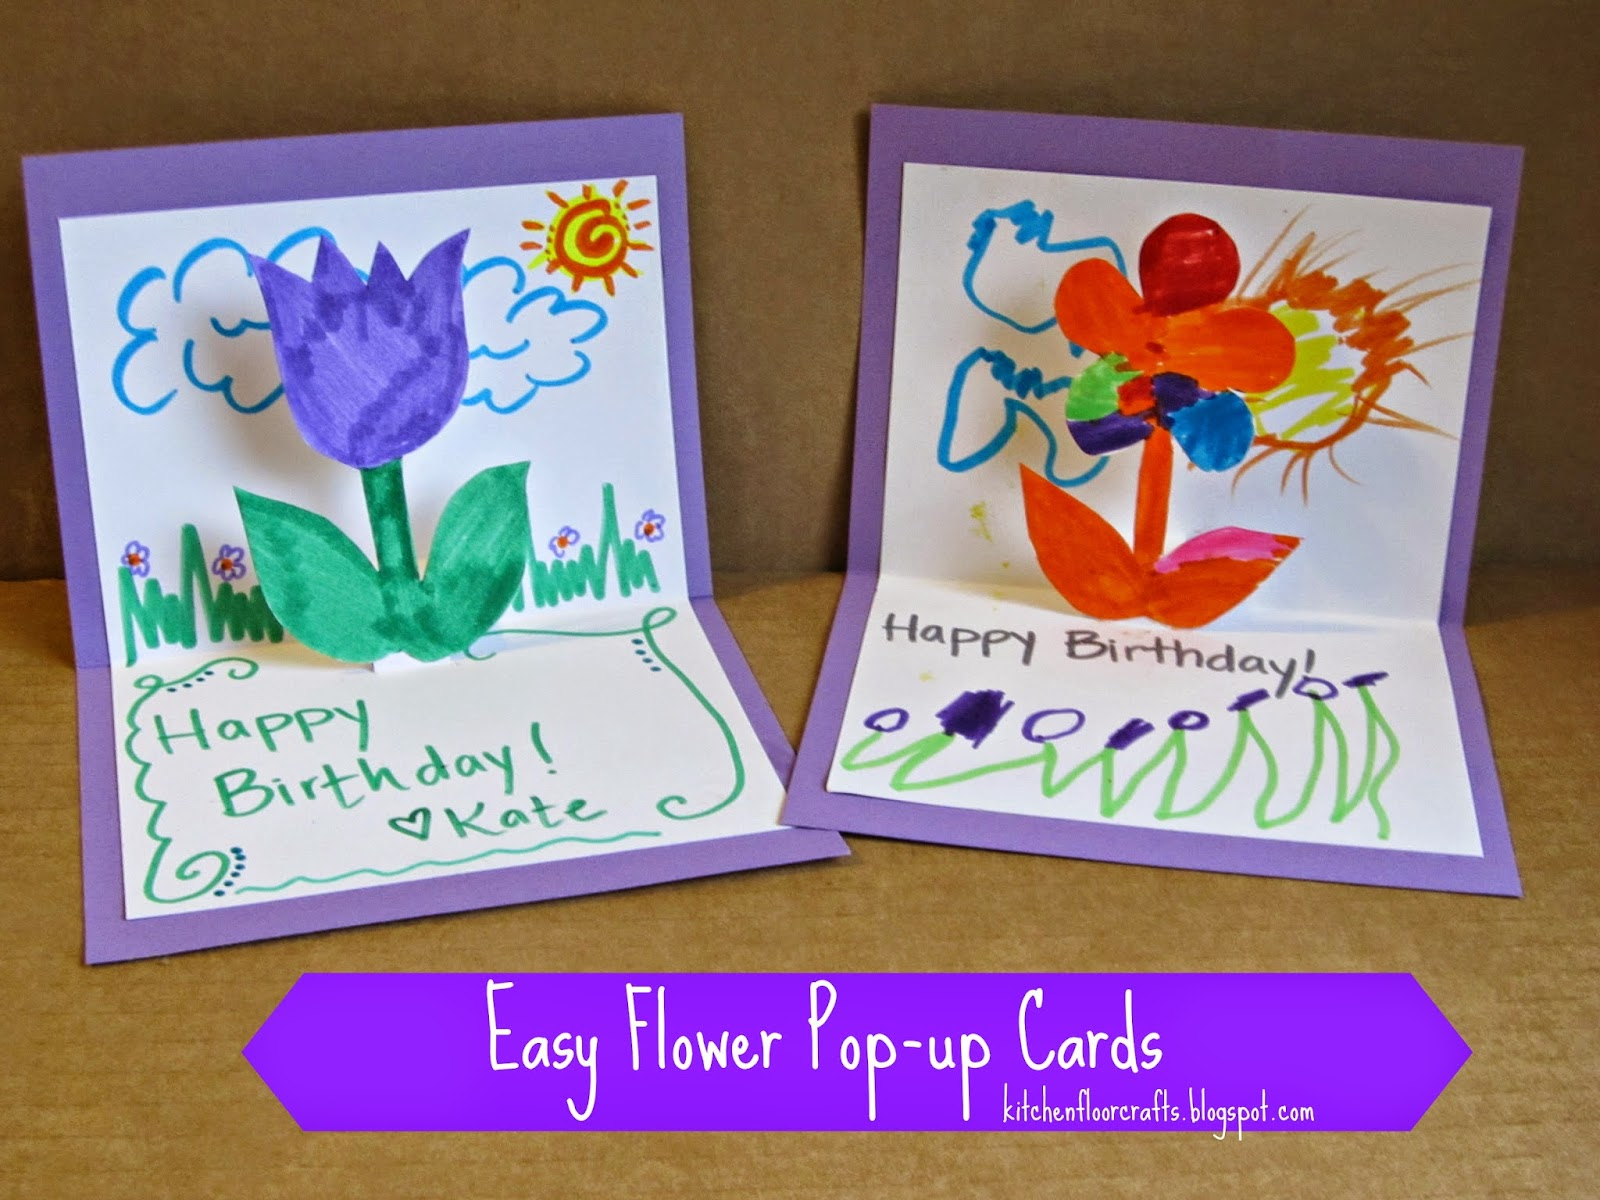 Birthday Card Ideas For Toddlers To Make Funny Homemade Birthday For Mom Card Ideas From Daughter Envelopes